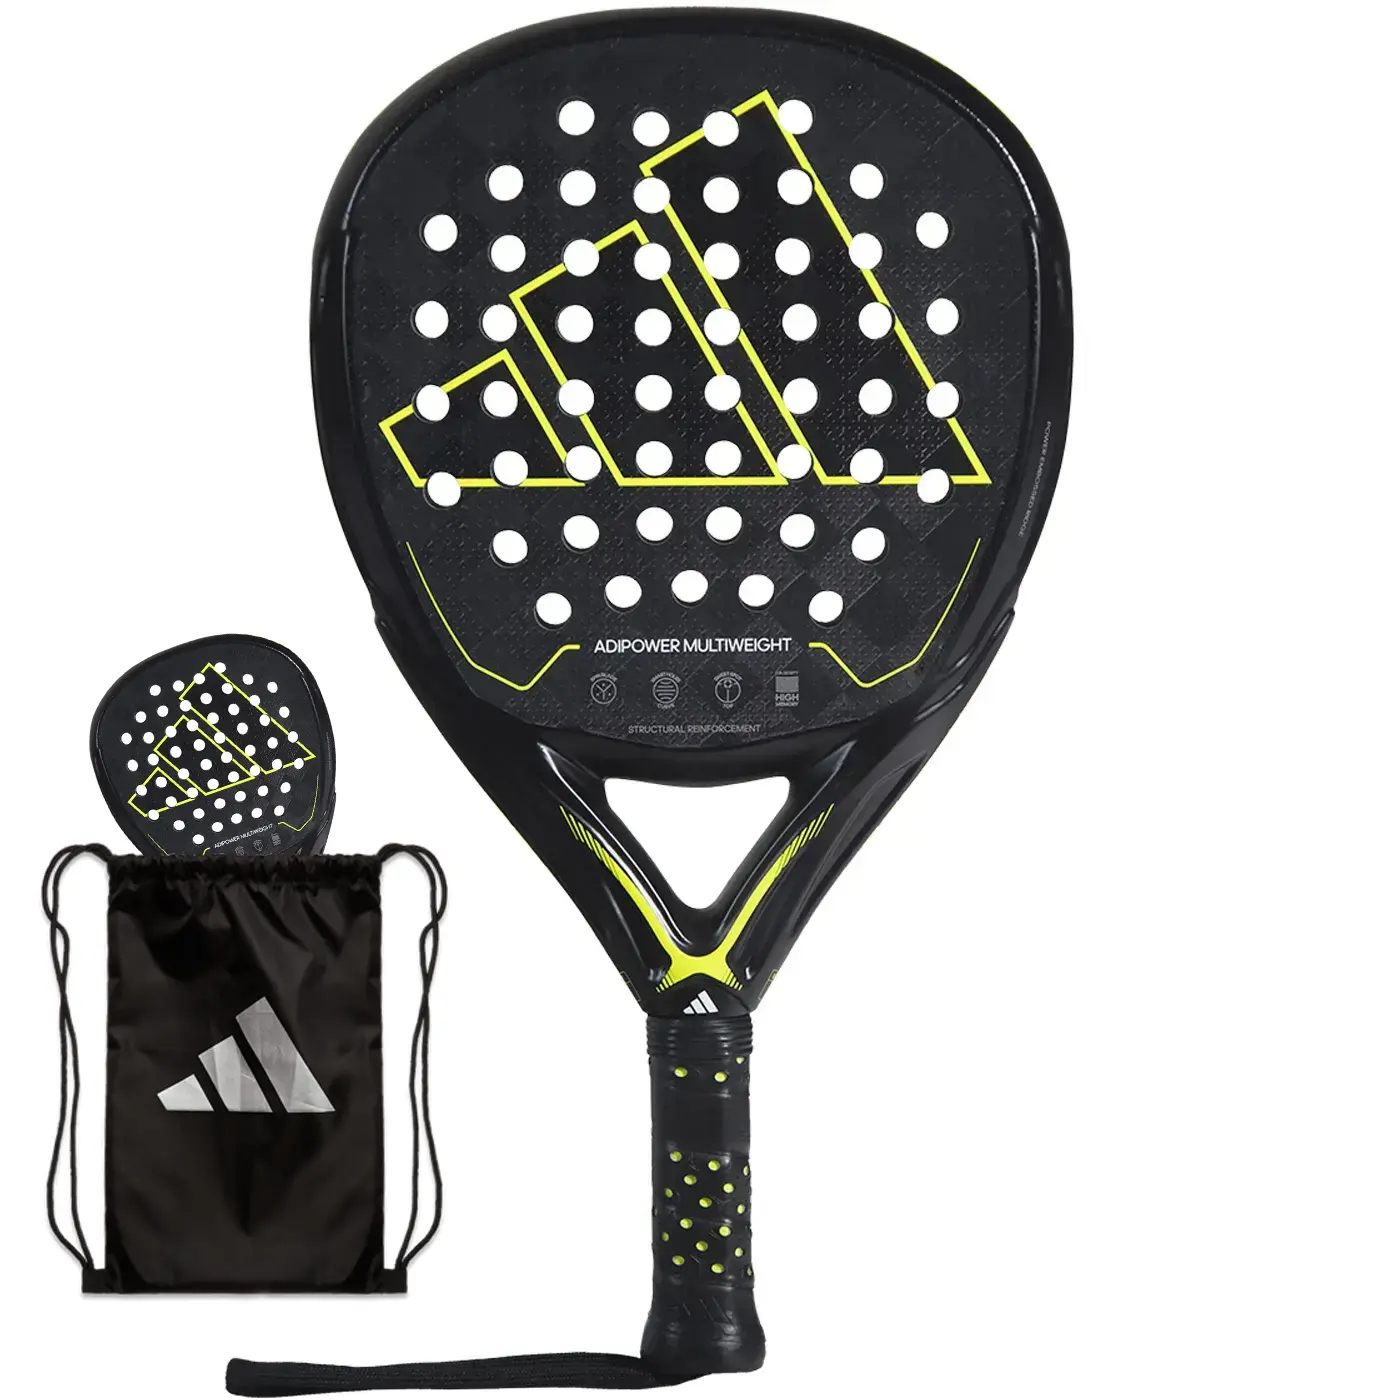 New Head Extreme 2024 collection, elevate your game with extreme power -  Zona de Padel